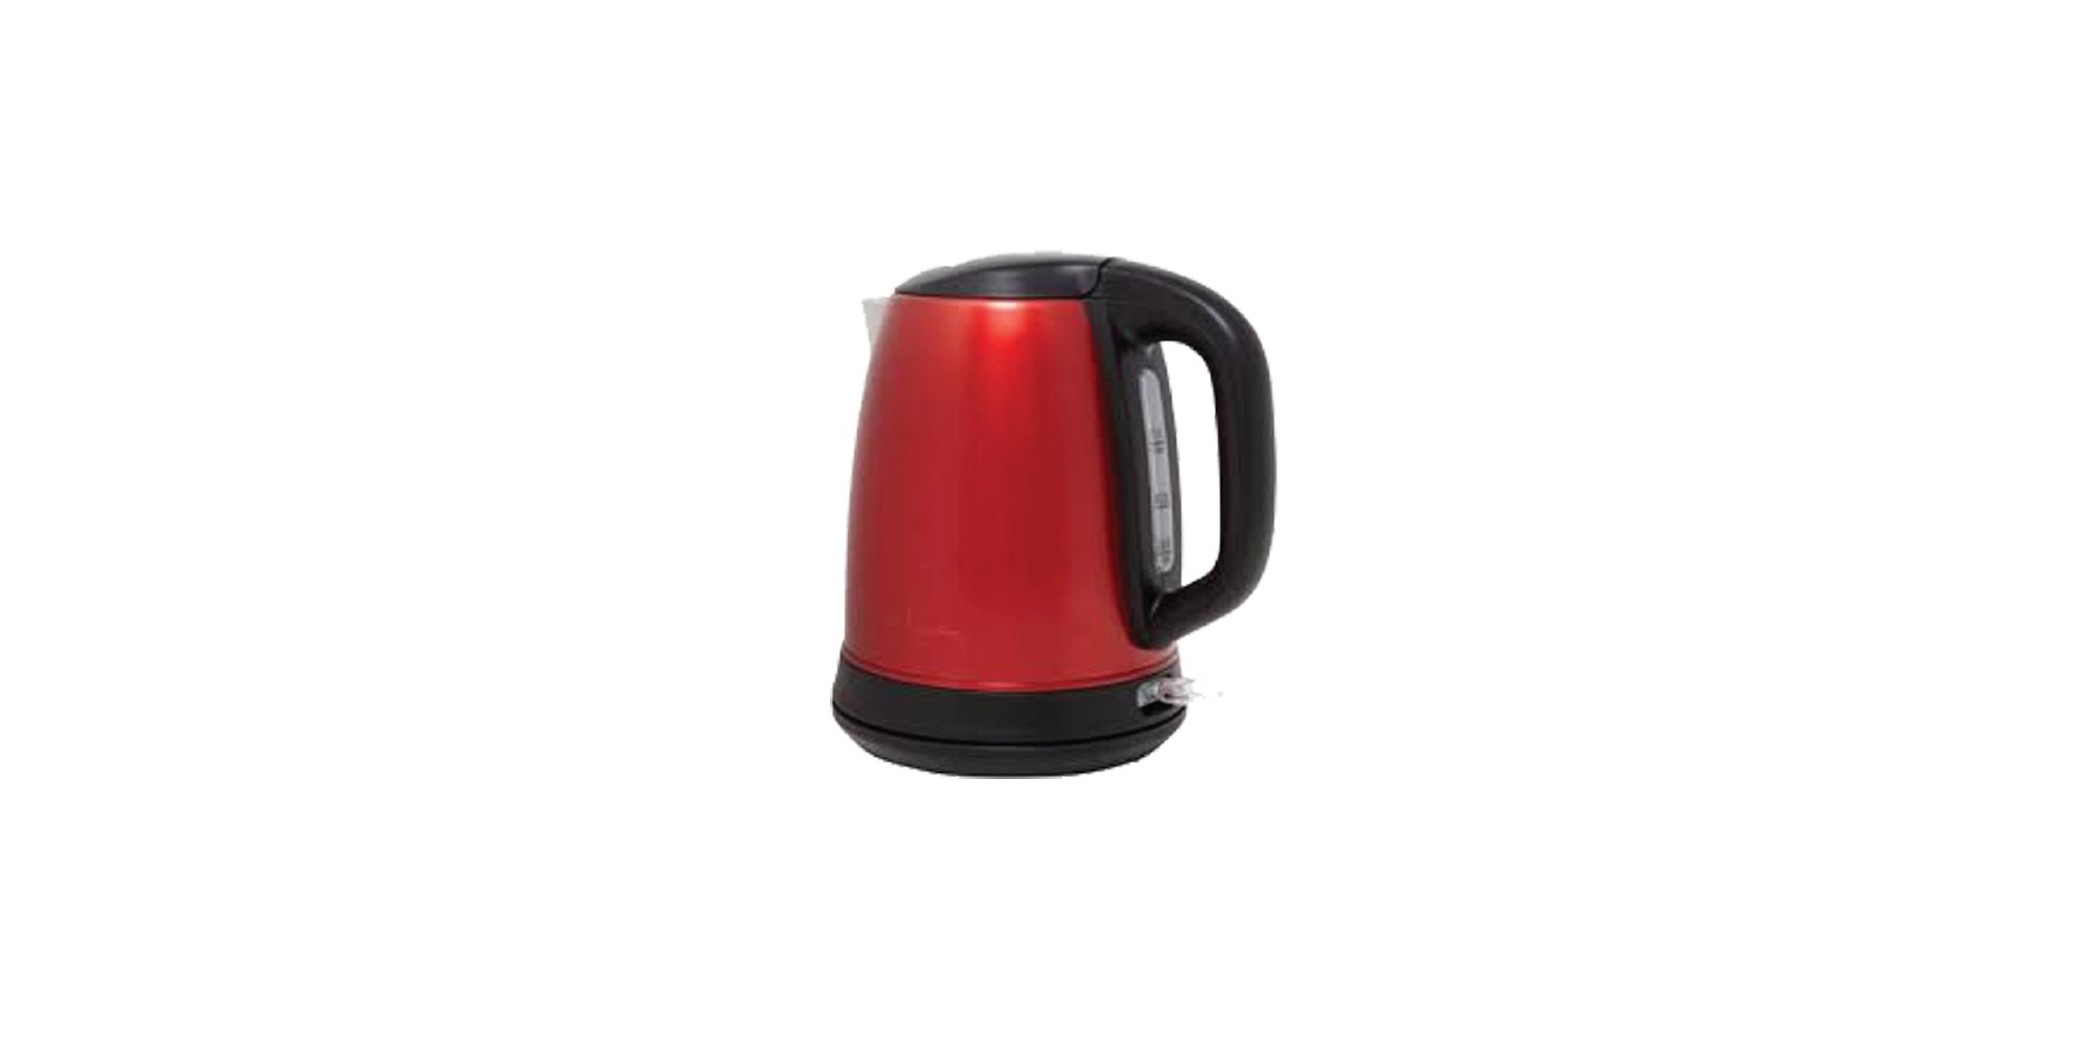 Moulinex BY550510 Subito 1.7L S/S Red Kettle